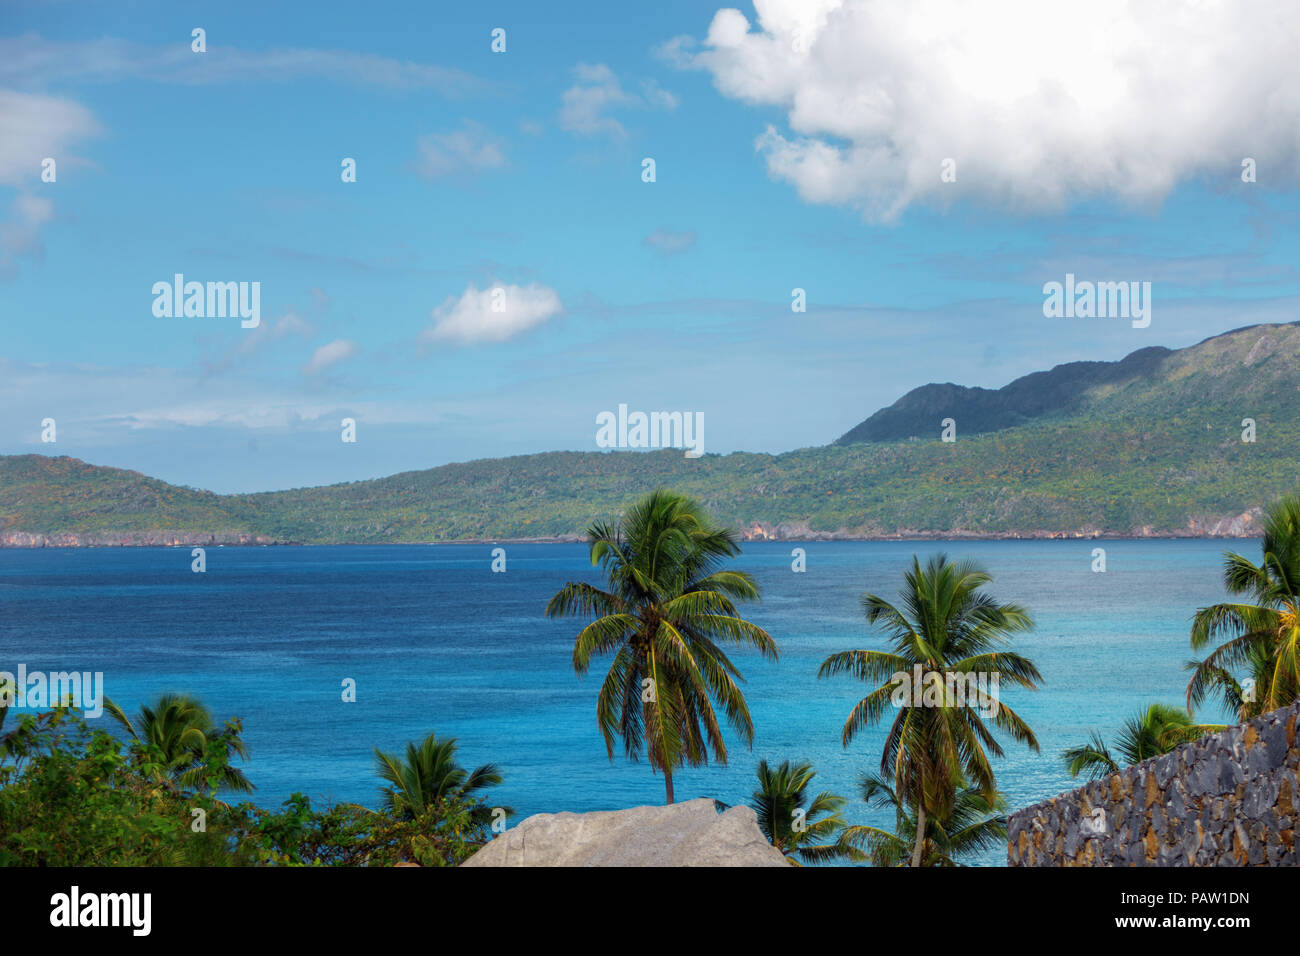 beautiful tropical landscape, Bay, green mountains, palm trees. Dominican Republic Stock Photo